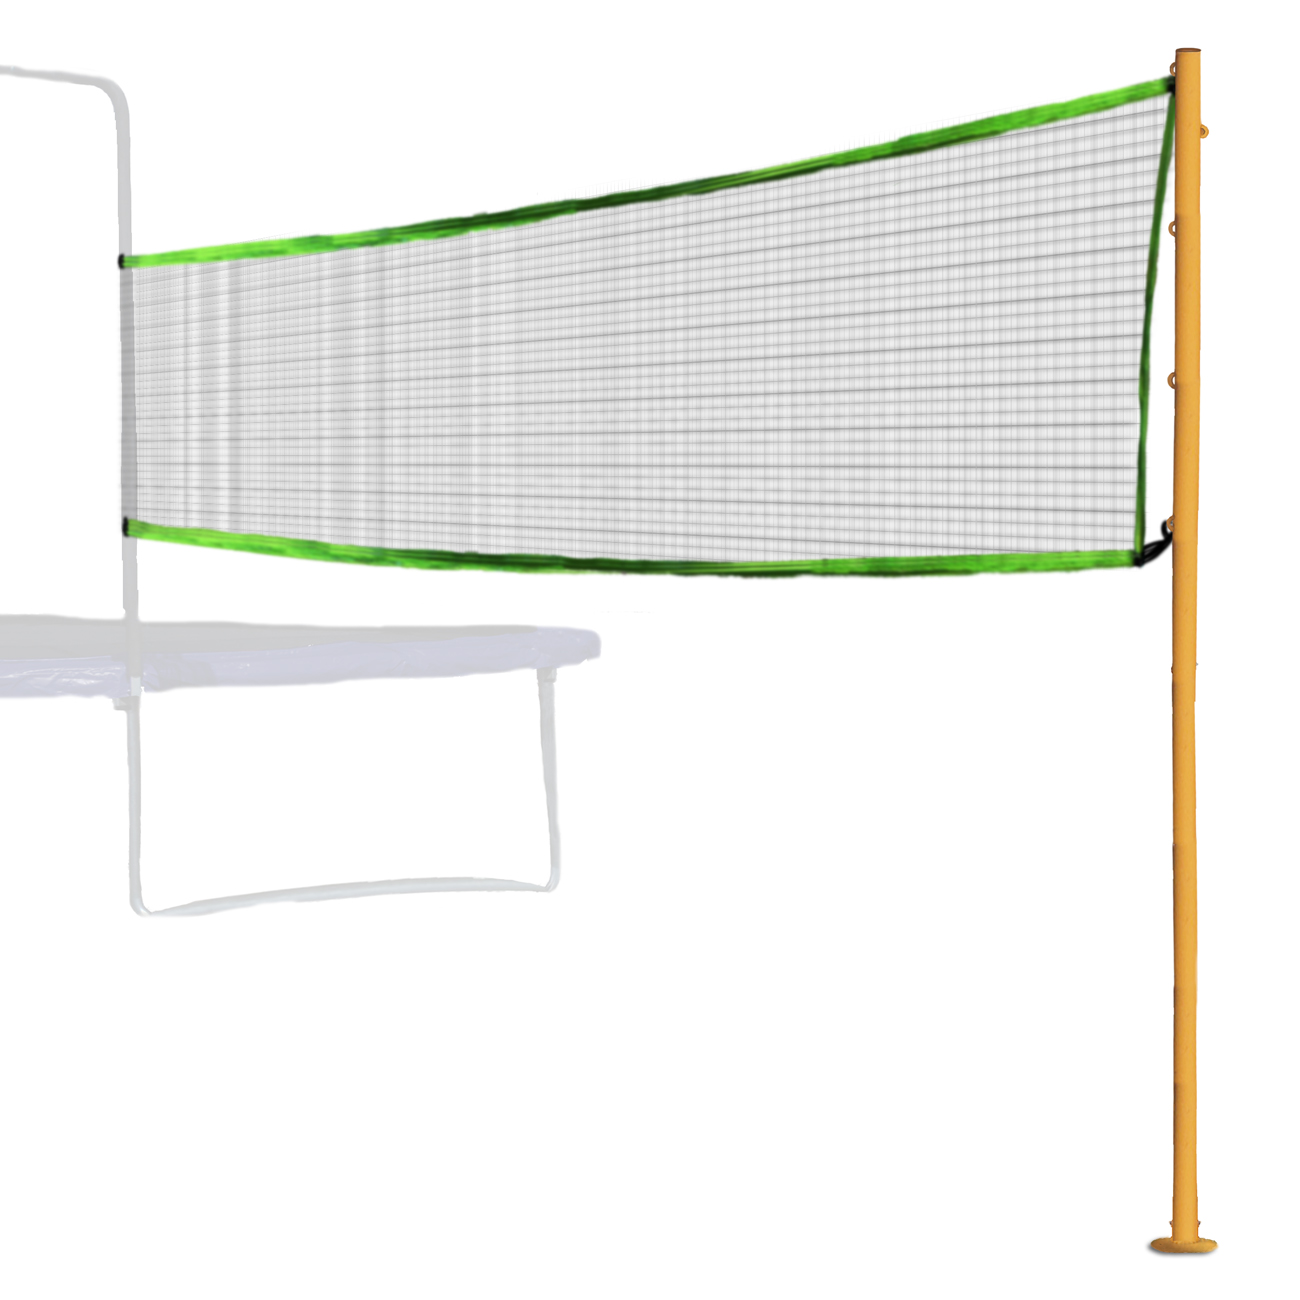 Skywalker Trampolines Volleyball Net Accessory - image 1 of 6